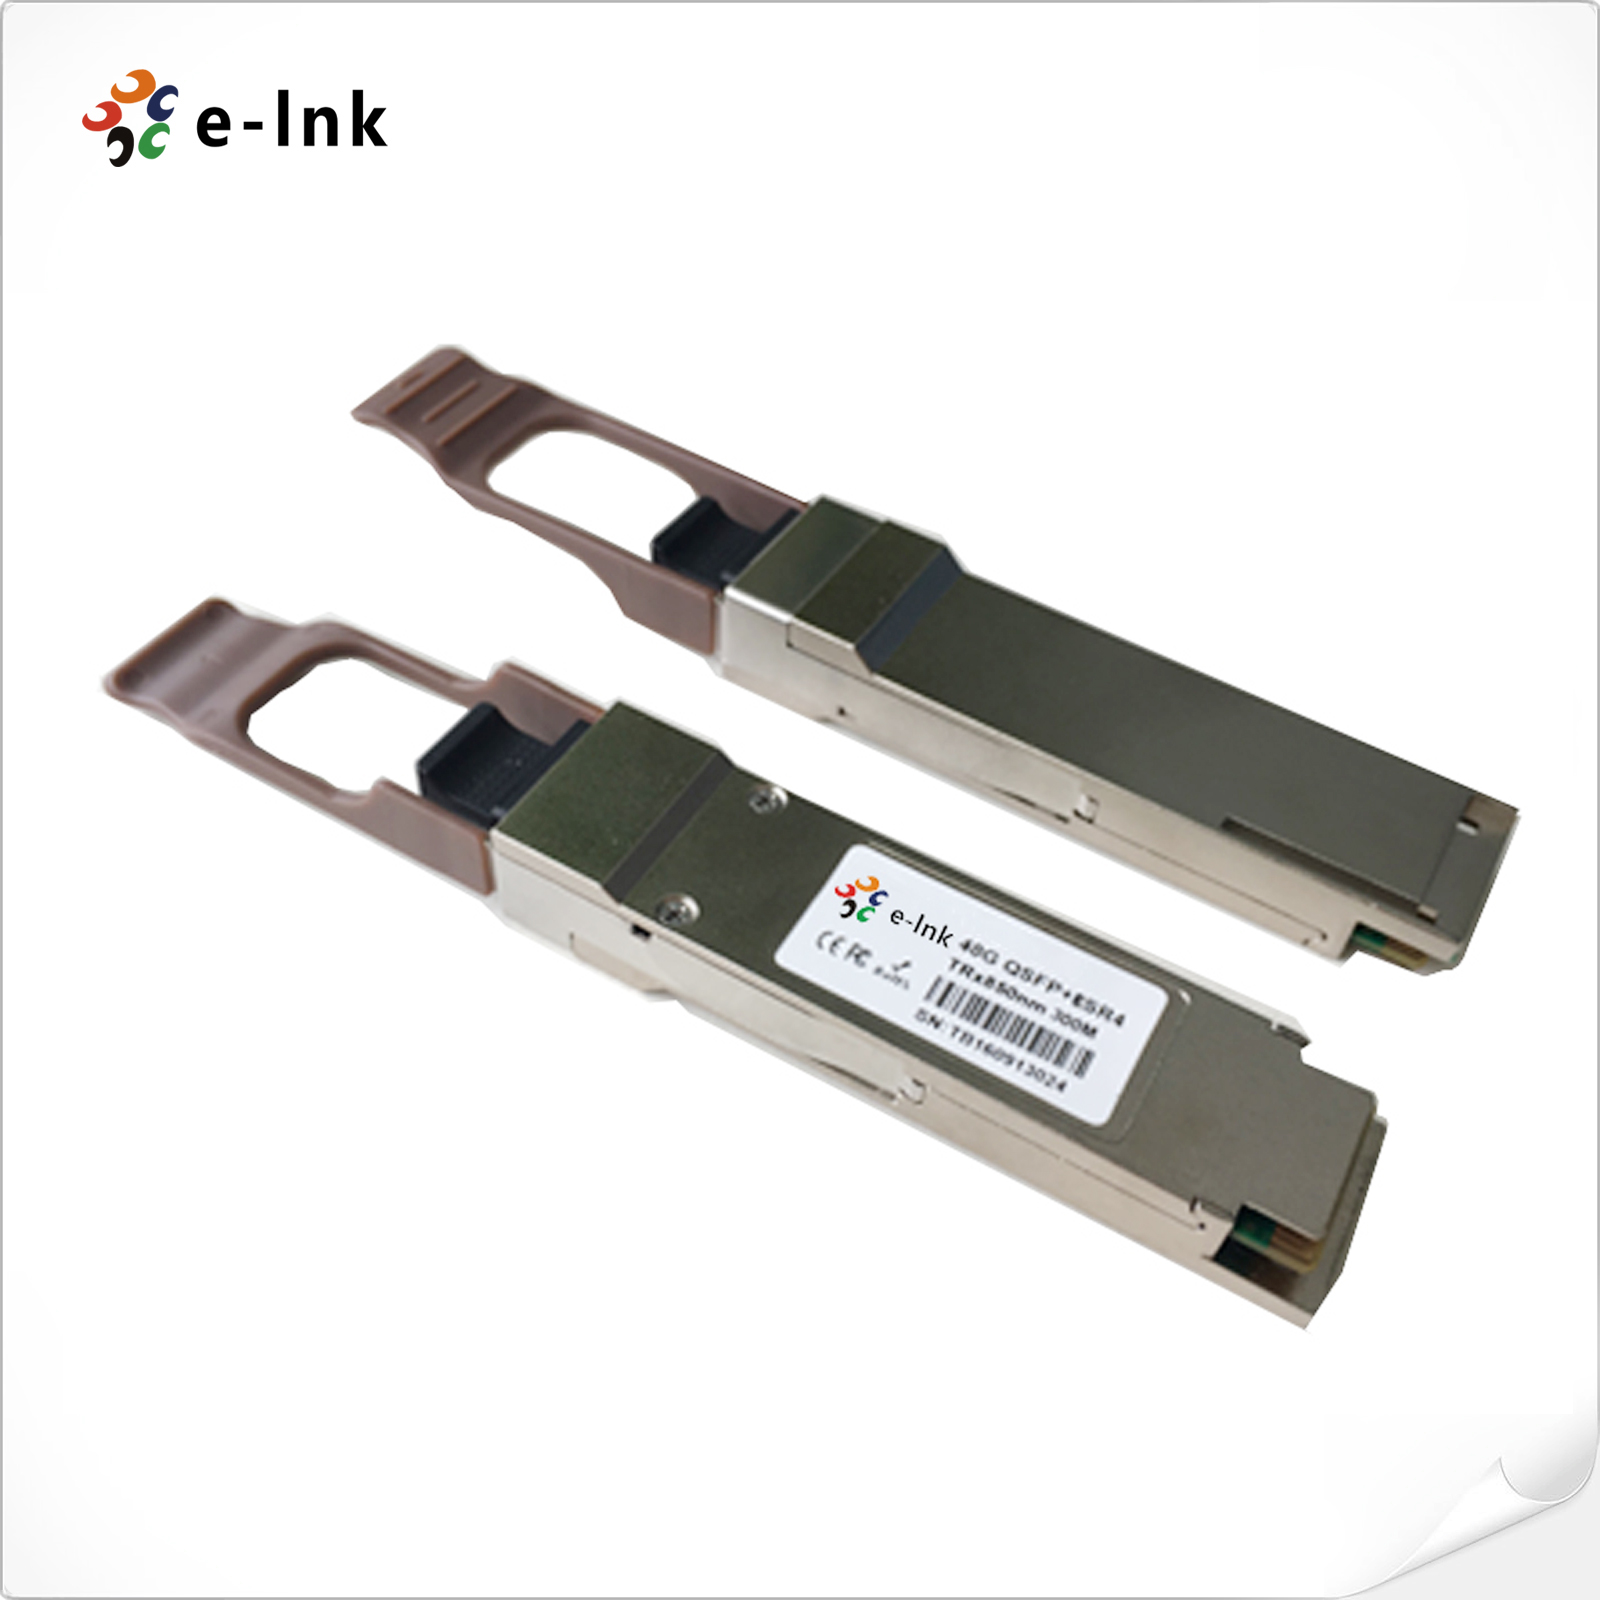 40Gb/s 300m QSFP+ Transceiver, MTP/MPO Connector, 850nm, VCSEL, Multimode